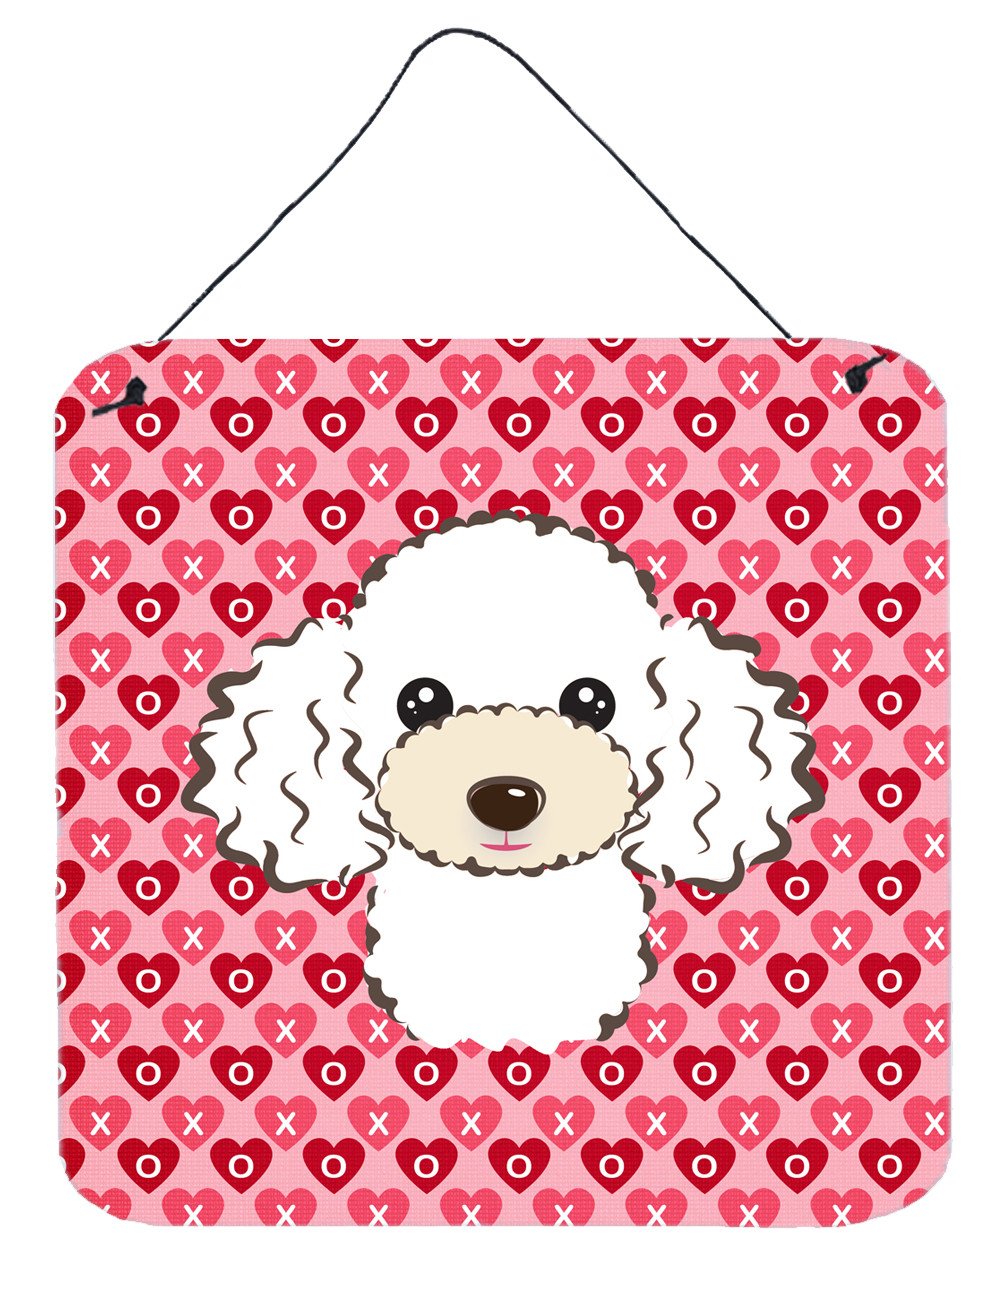 White Poodle Hearts Wall or Door Hanging Prints BB5327DS66 by Caroline's Treasures